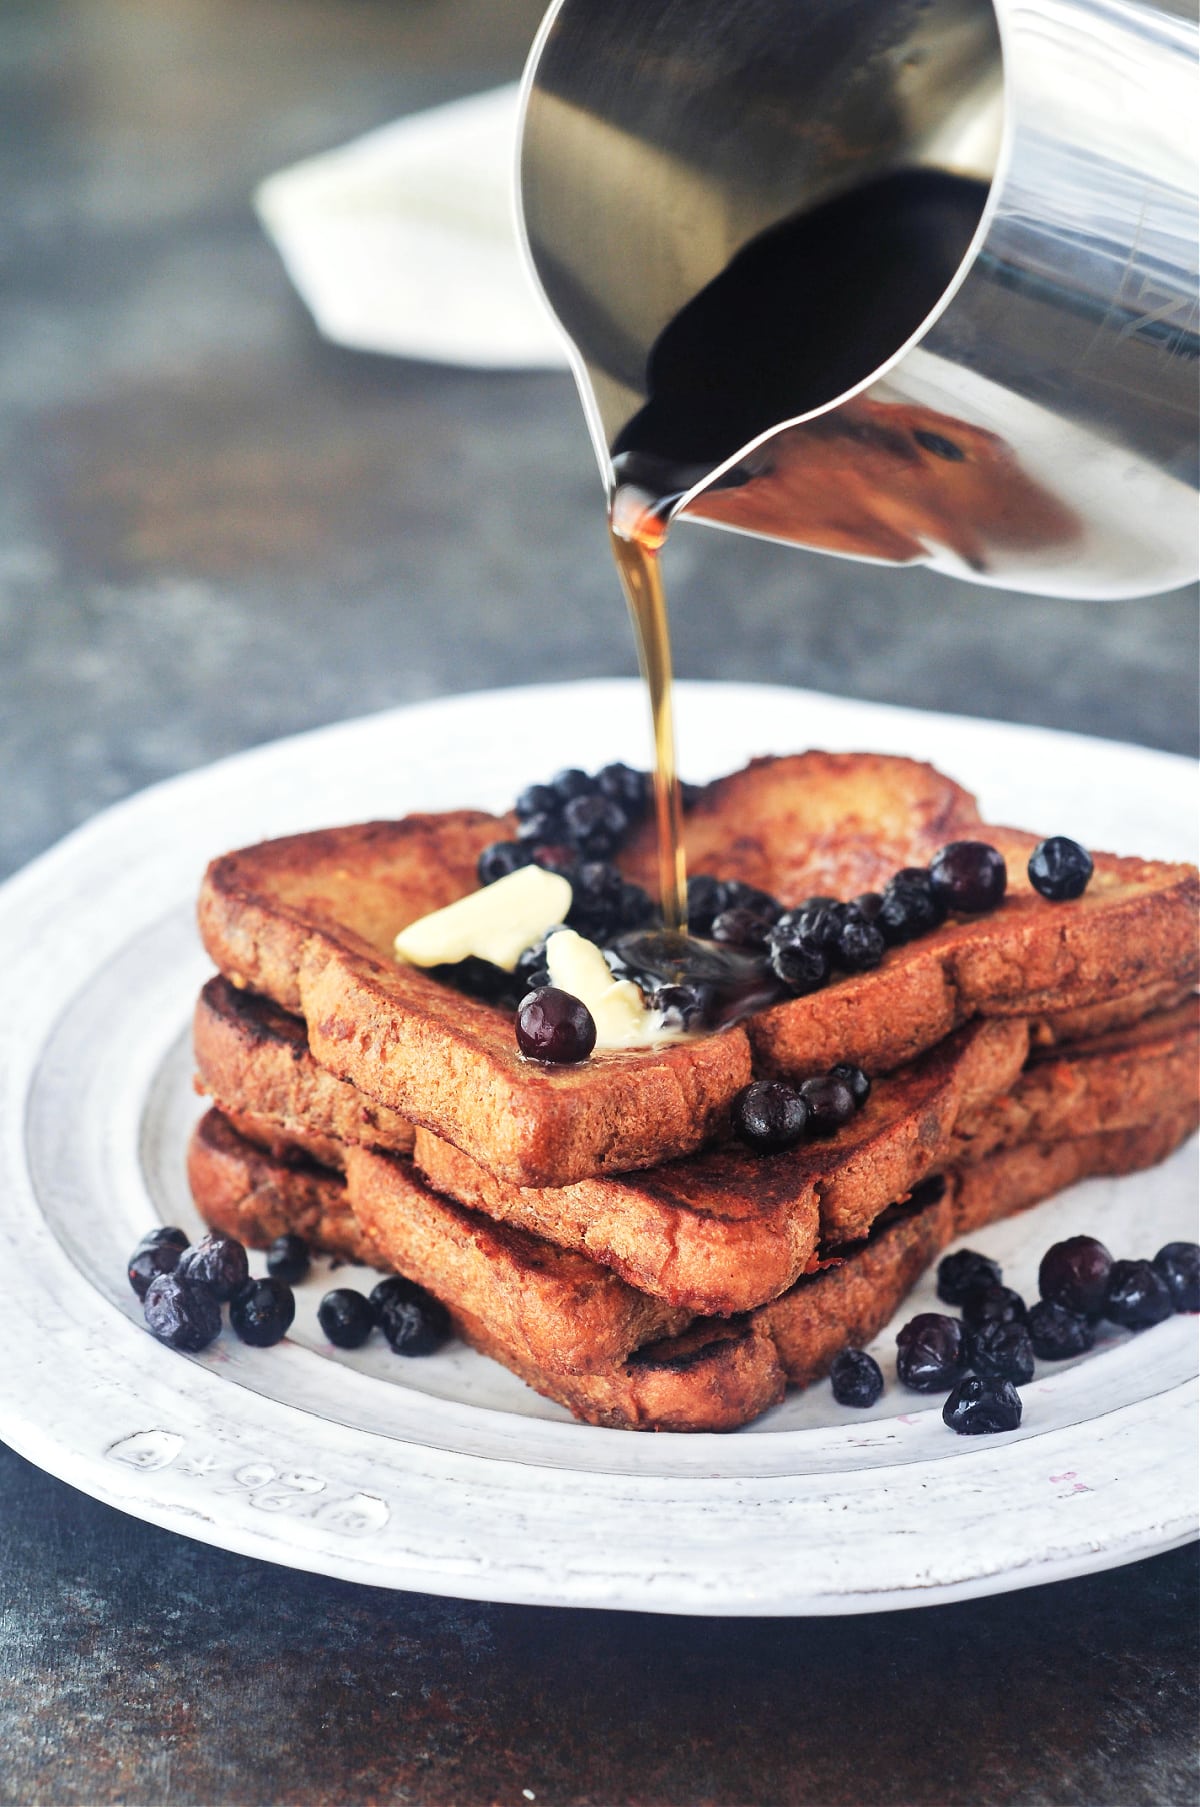 A stack of four slices of Baileys Irish cream French toast on a rustic white plate. French toast is garnished with blueberries and a silver pitcher pours maple syrup over the top.